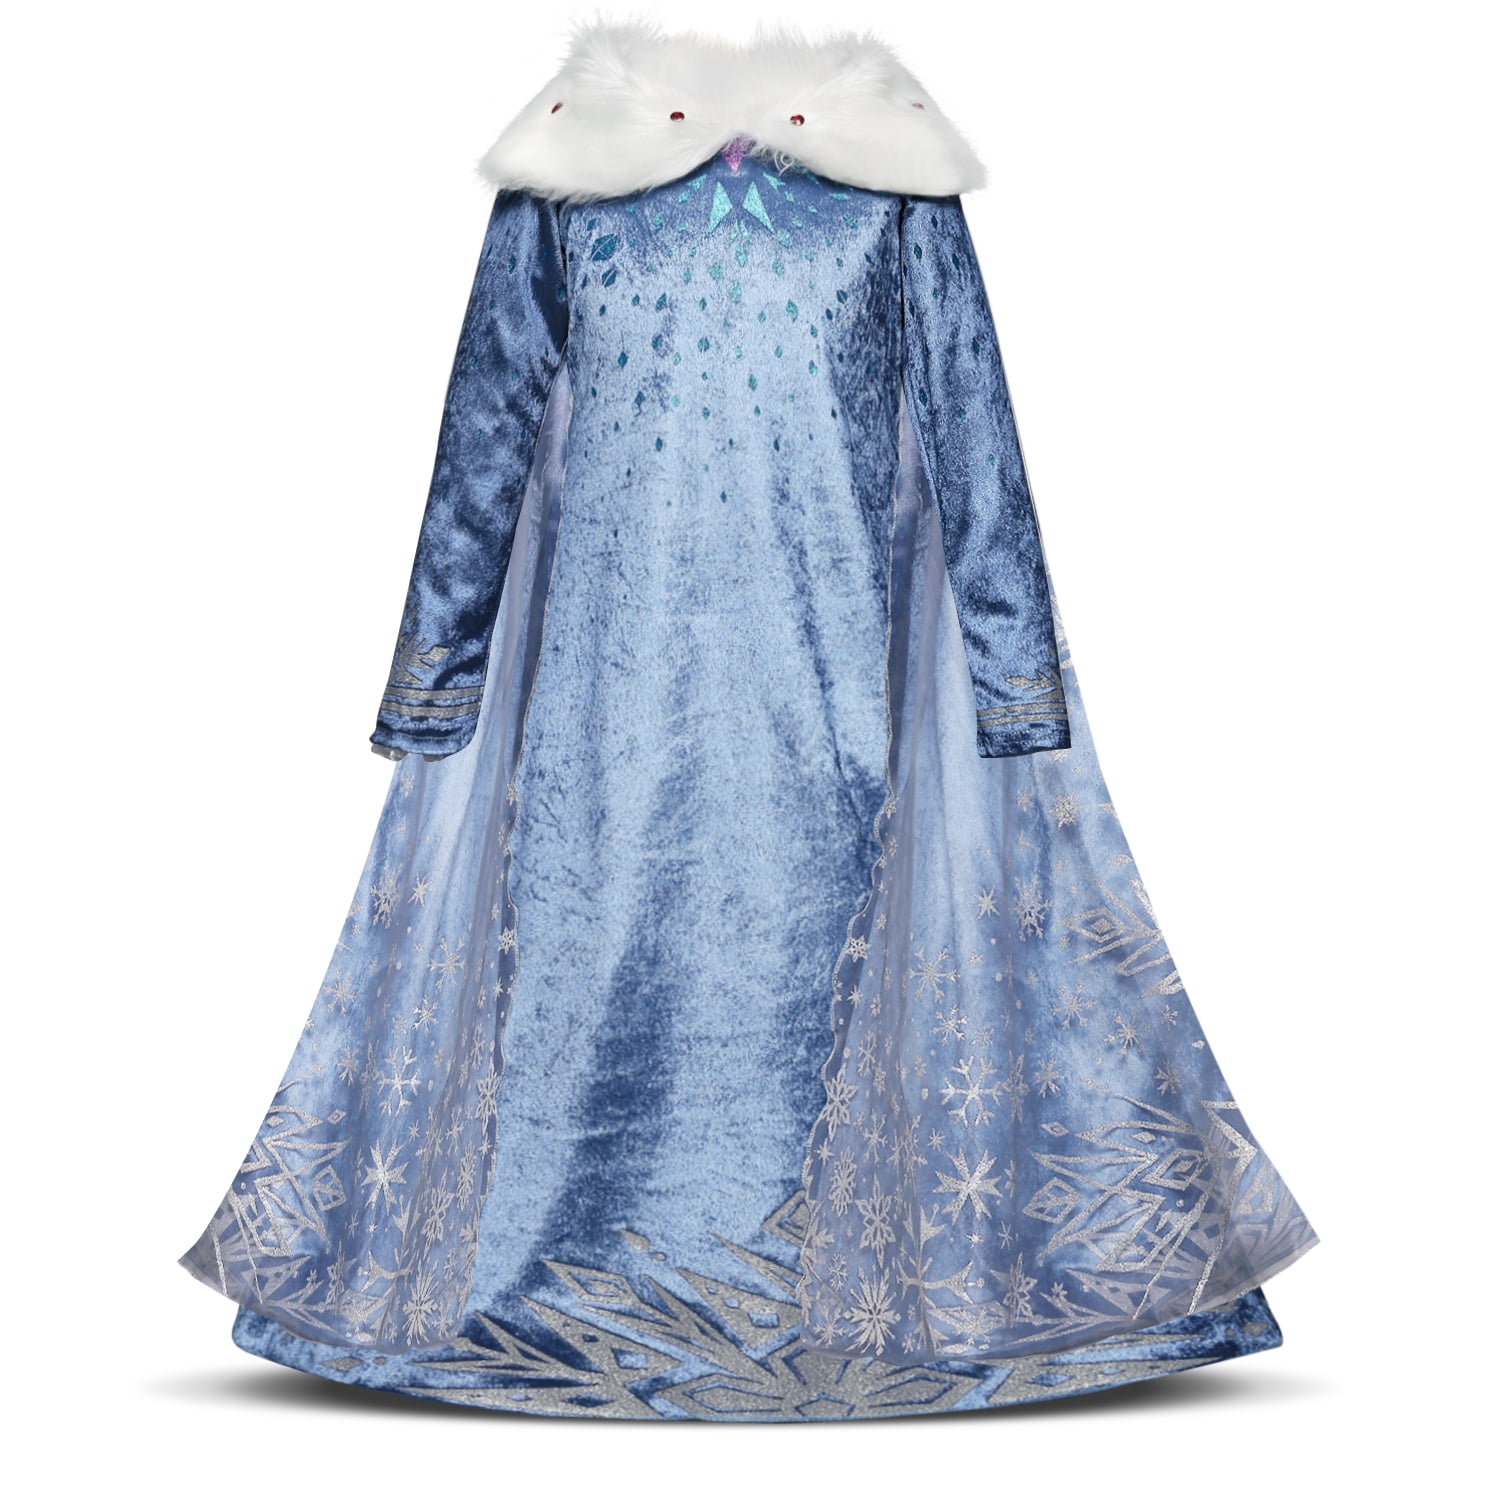 Girls Snow Queen Fancy Dress Up Costume Long Sleeve Elsa Anna Dress Halloween Christmas Outfit Age 4-10 Years